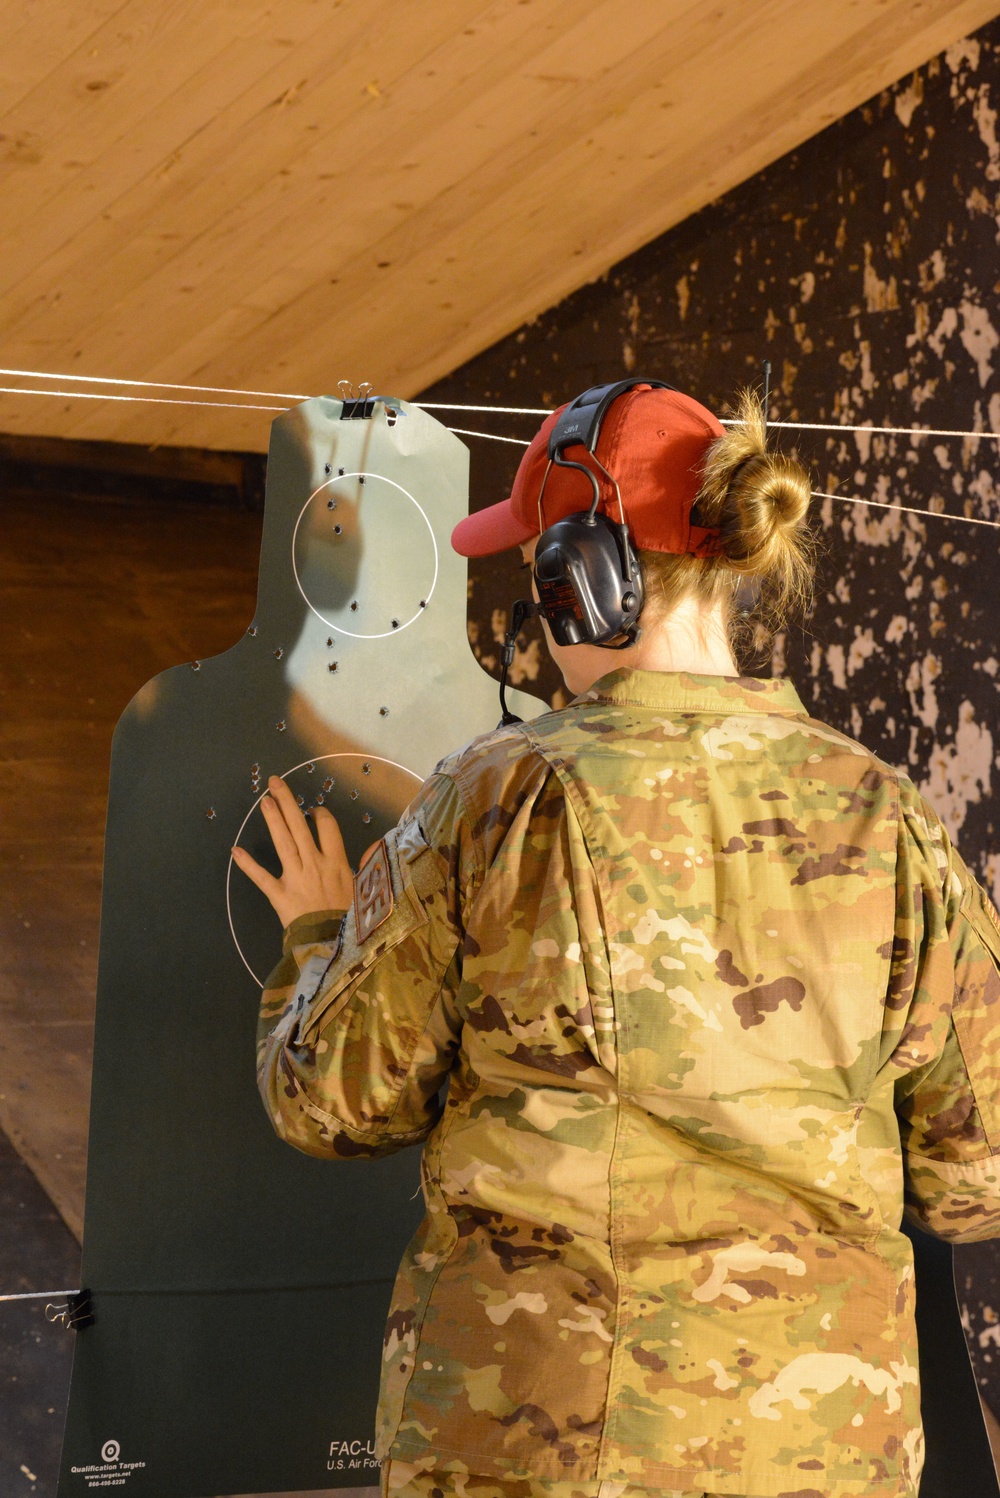 424TH Air Base Squadron on range indoor-M9 pistol and M4 rifle